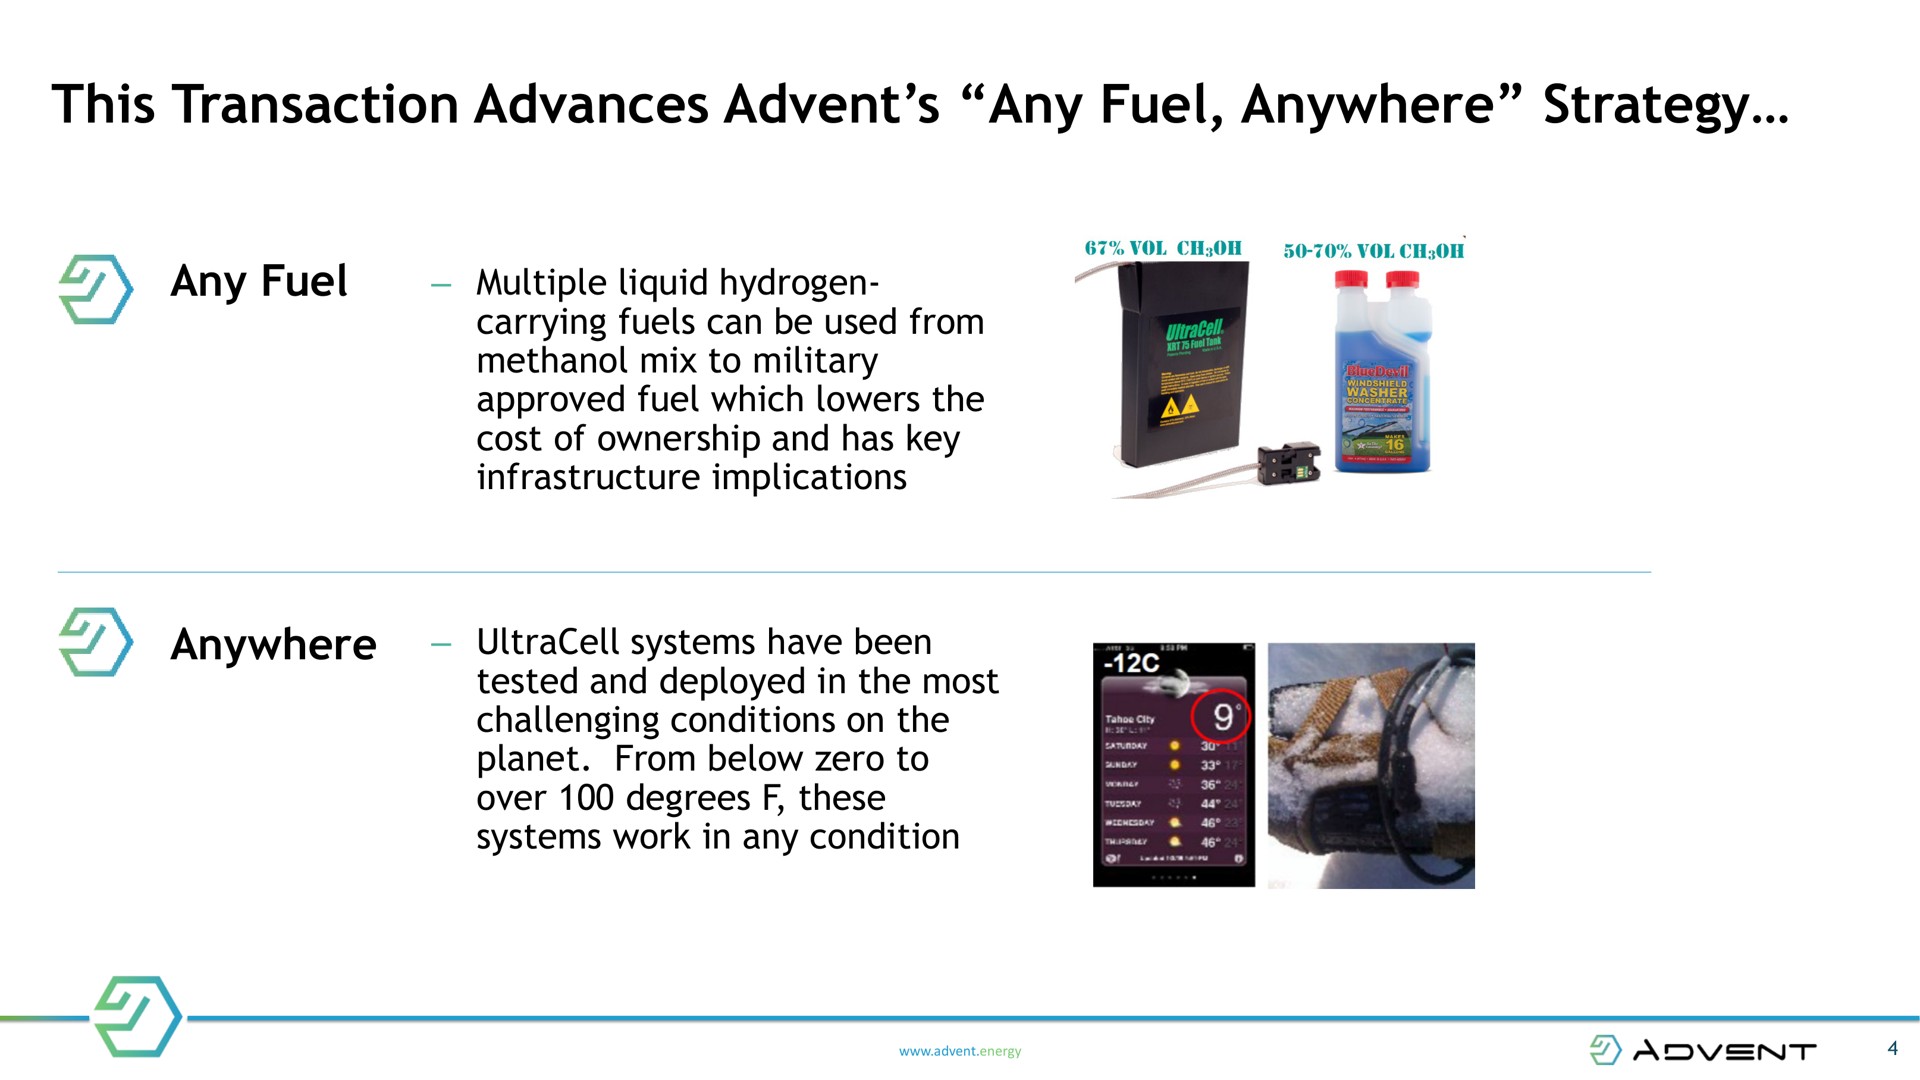 this transaction advances any fuel anywhere strategy | Advent